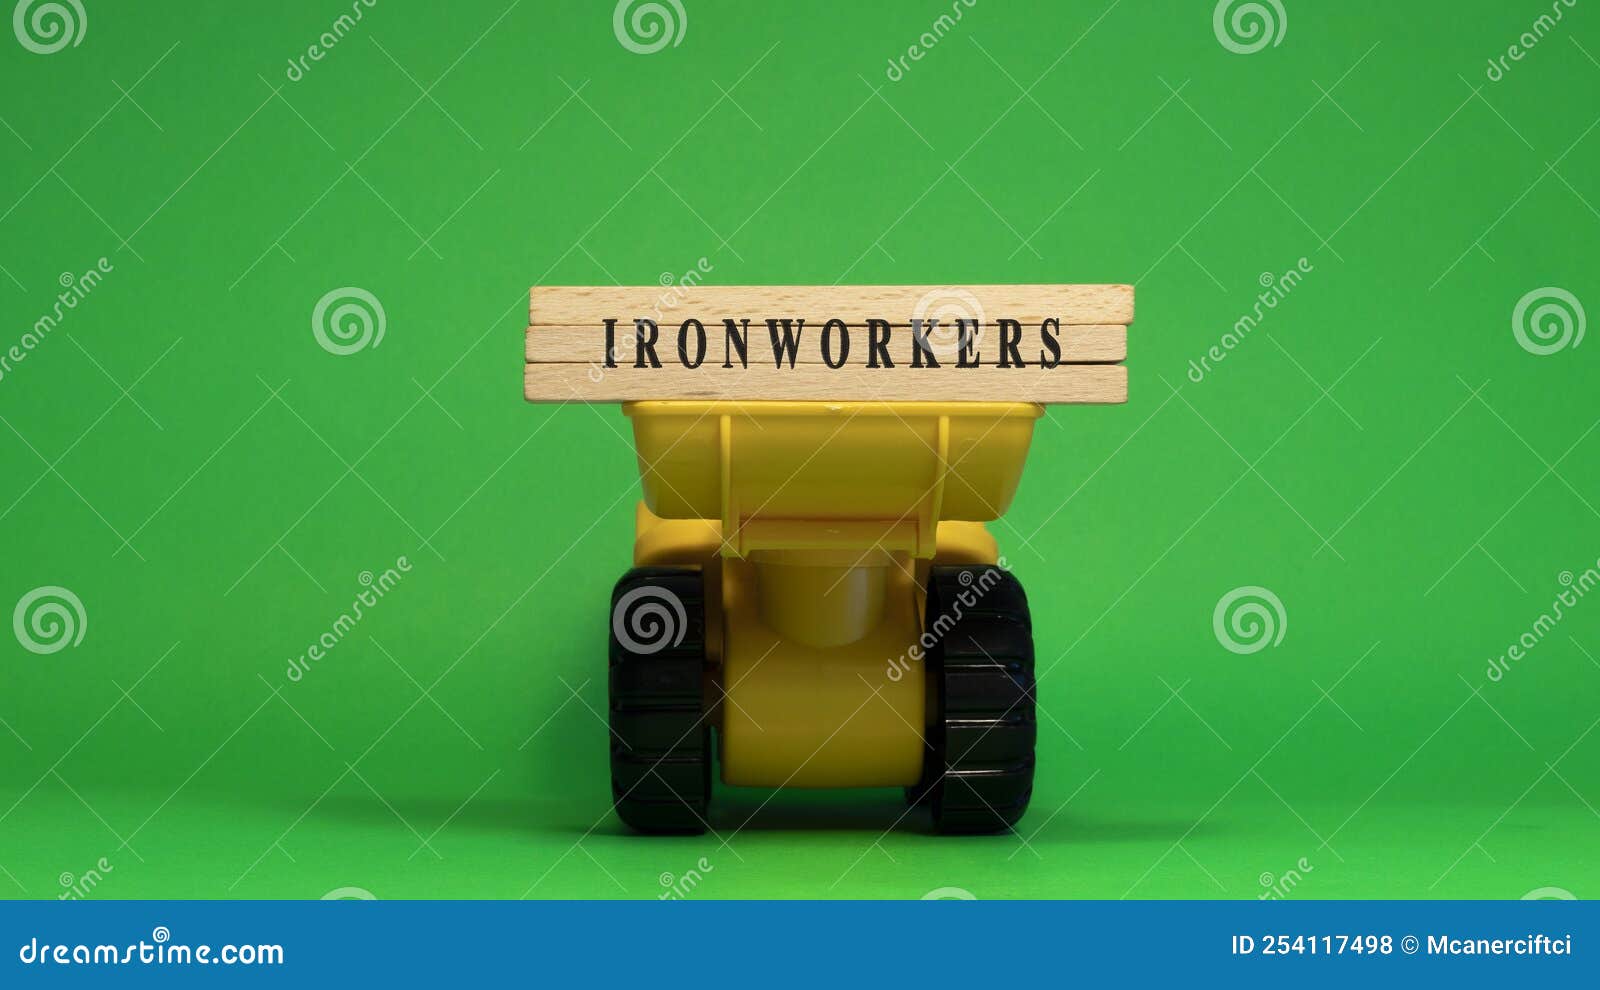 the-word-ironworkers-is-written-on-wooden-sticks-machine-concept-stock-photo-image-of-spark